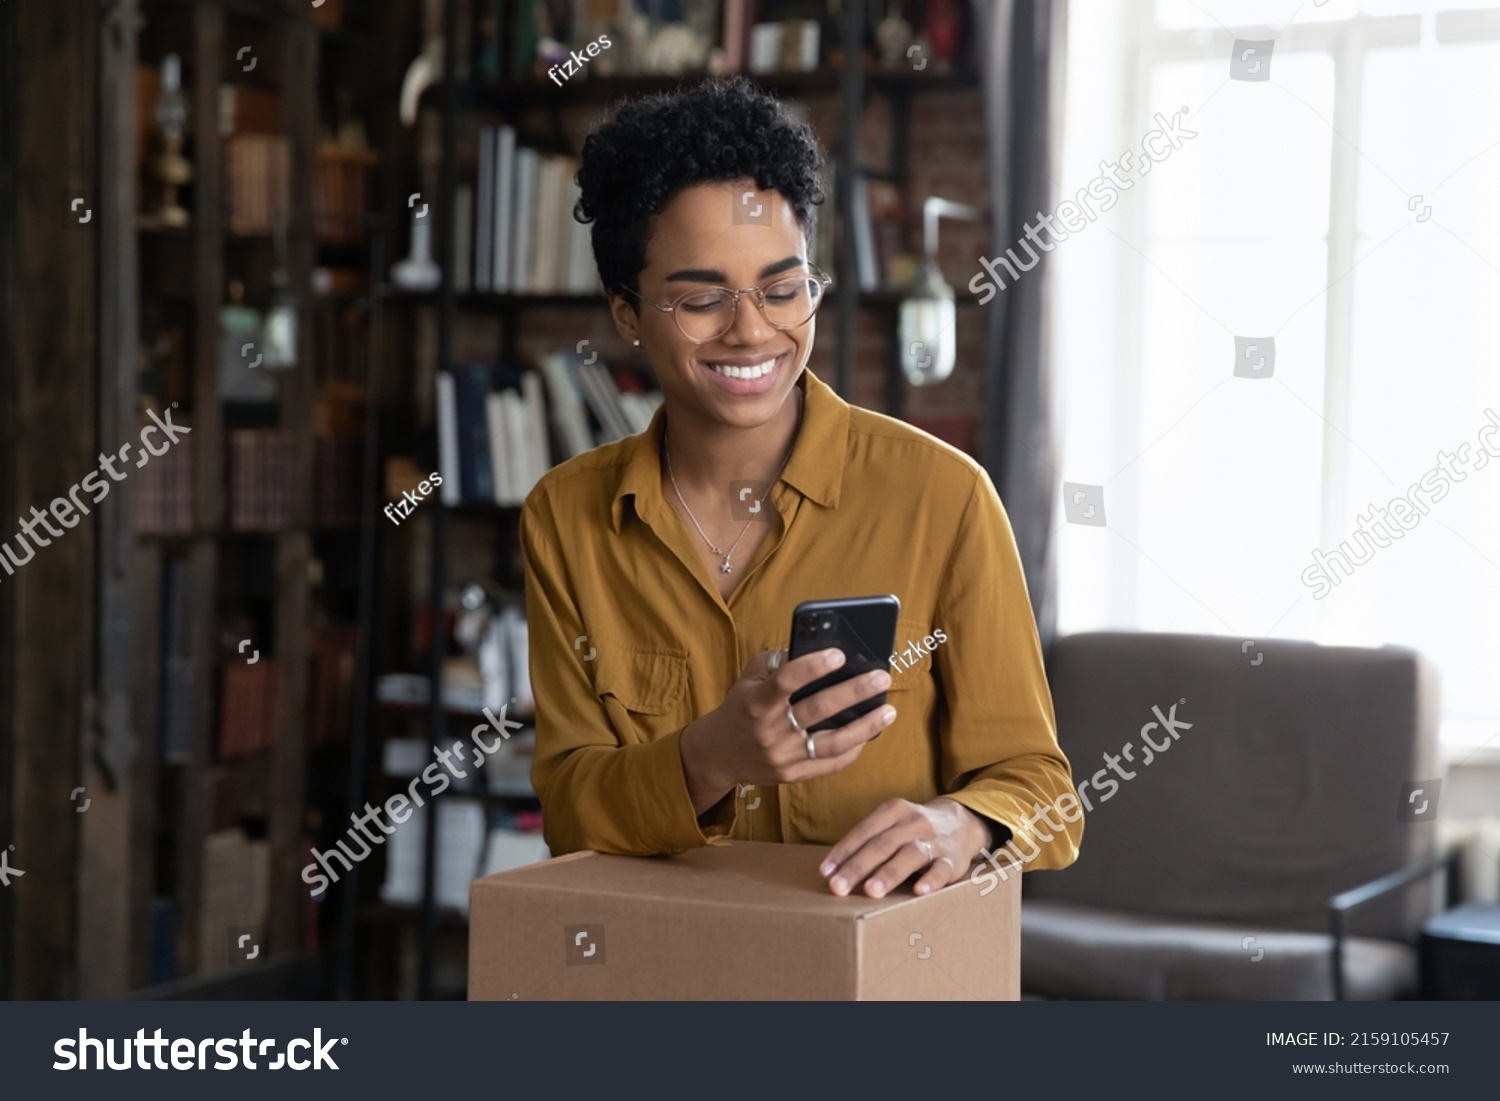 African woman client of easy trusted e-services online shipping, make order, use cellphone typing to courier, prepare parcel box for sending to friend abroad use reliable company of delivery services #2159105457